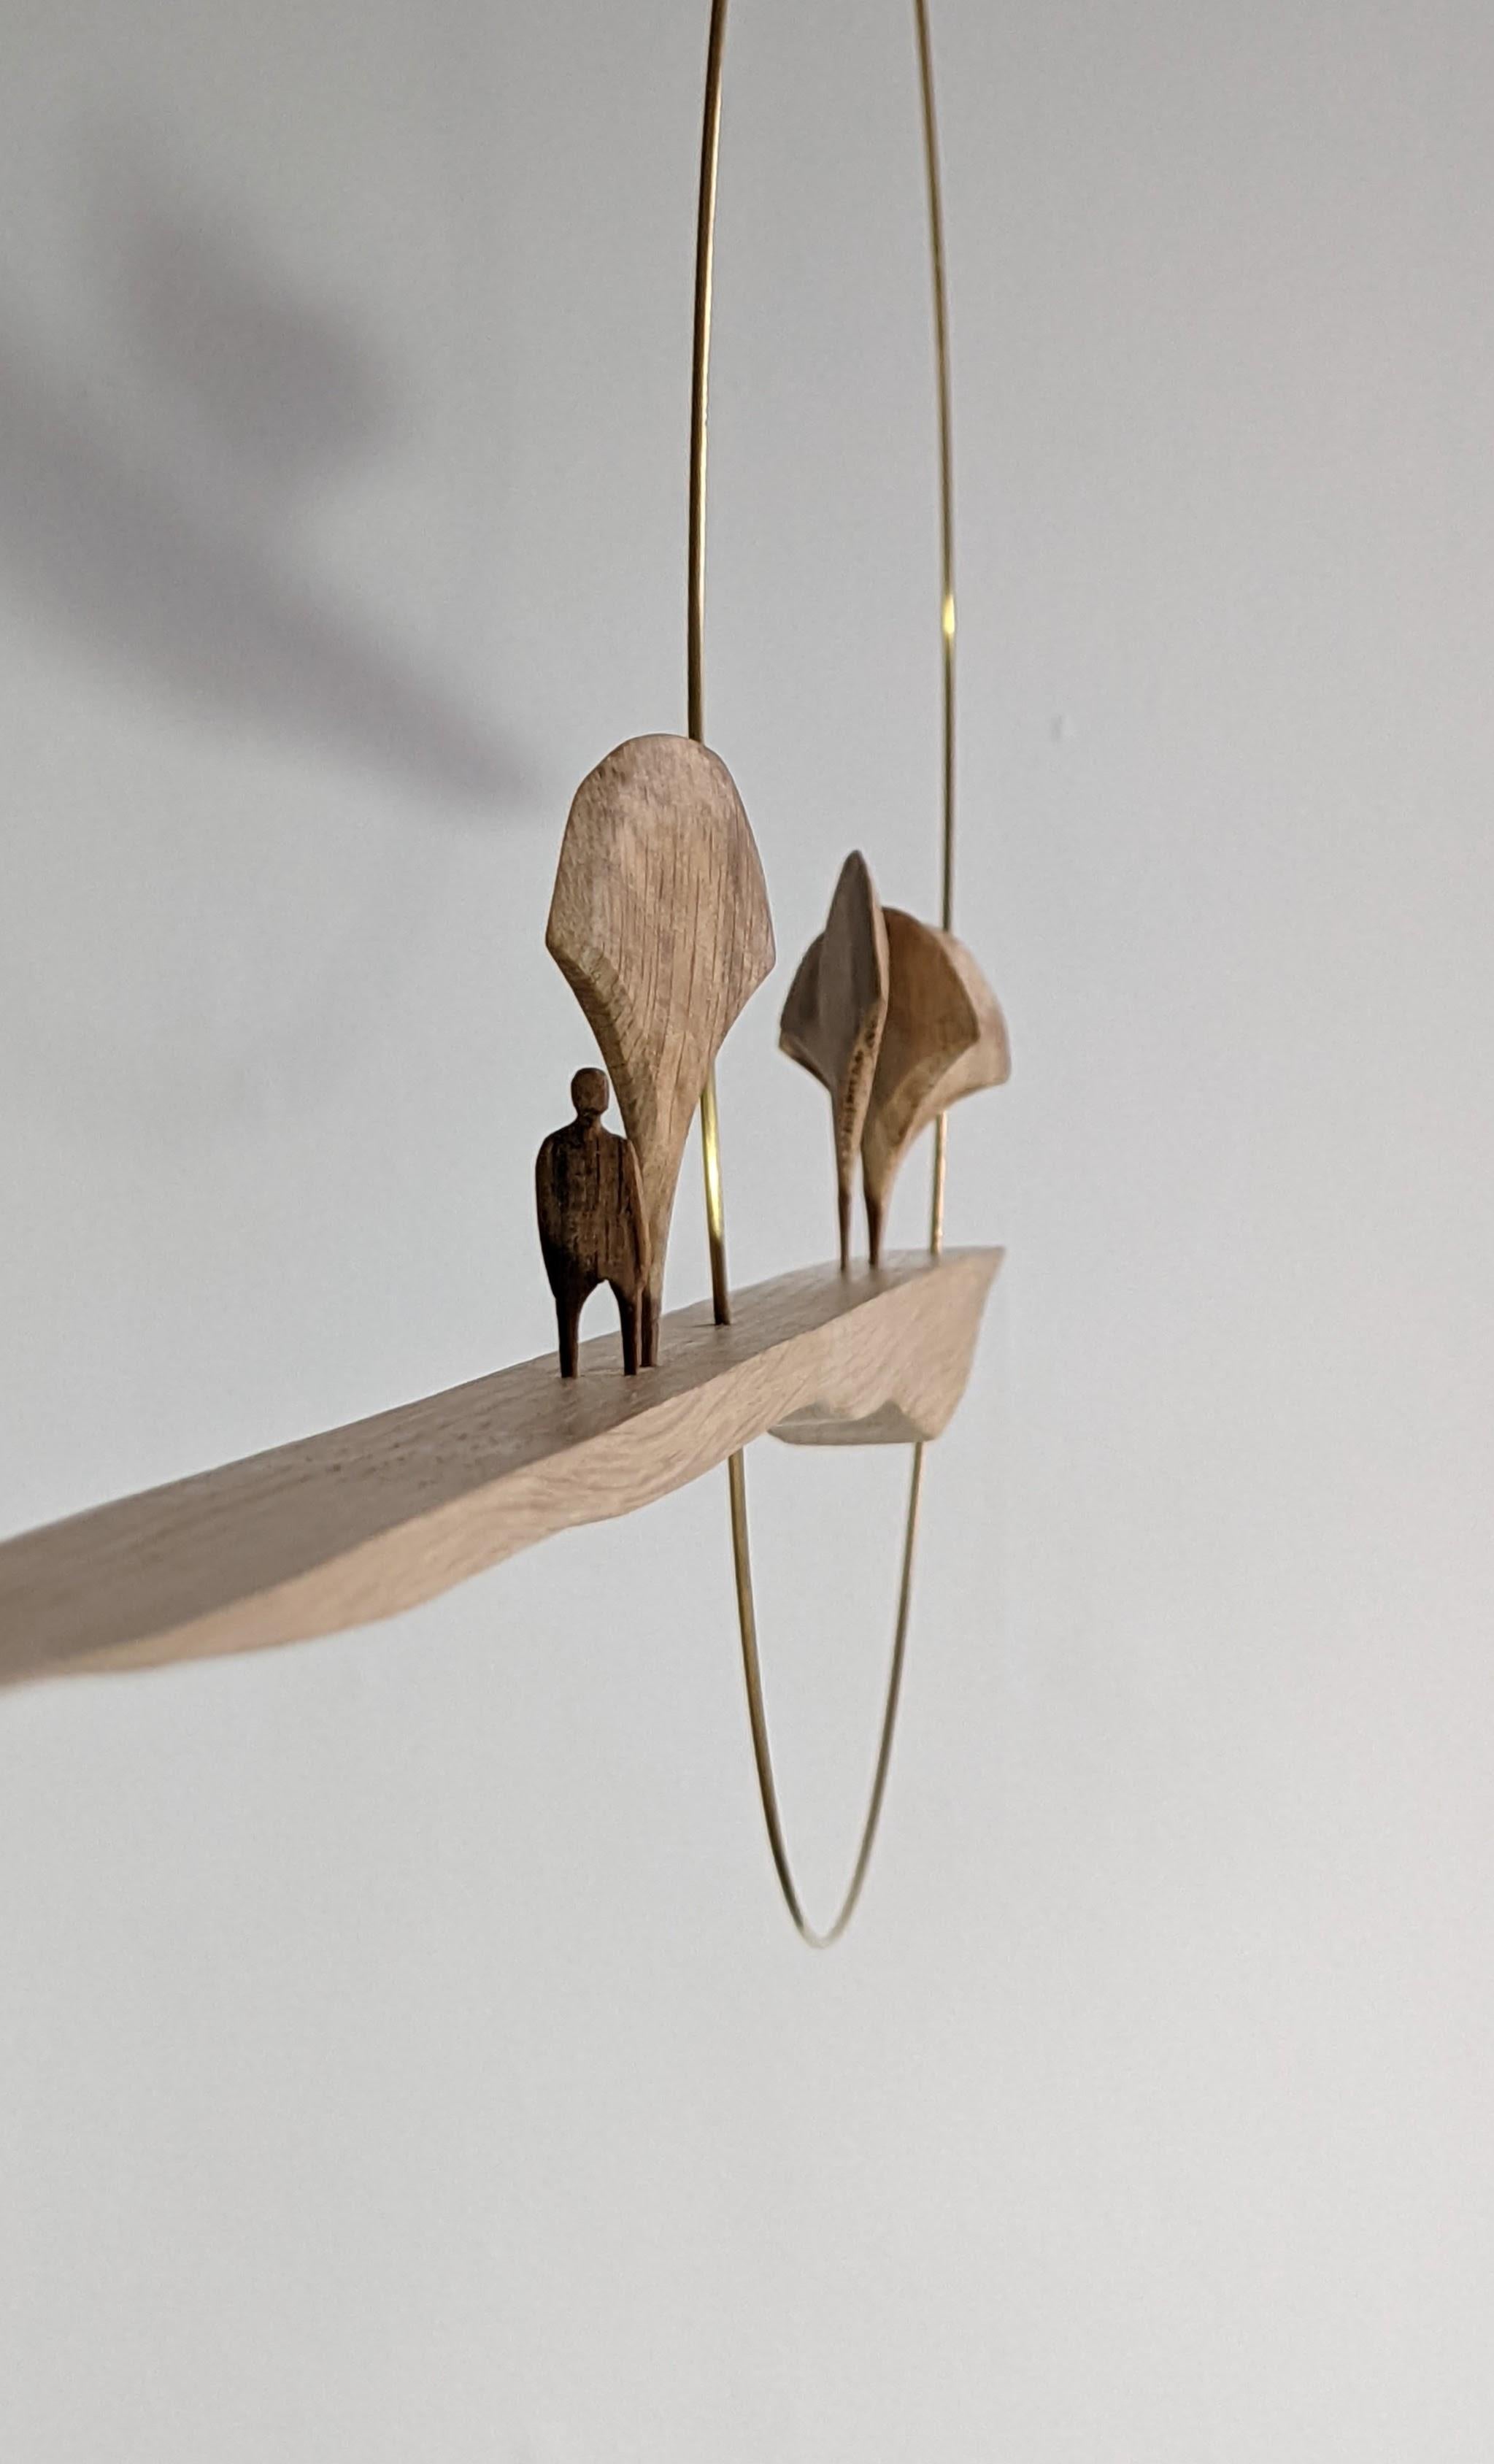 British Stone Pine, Mid-Century Style Wooden Hanging Mobile